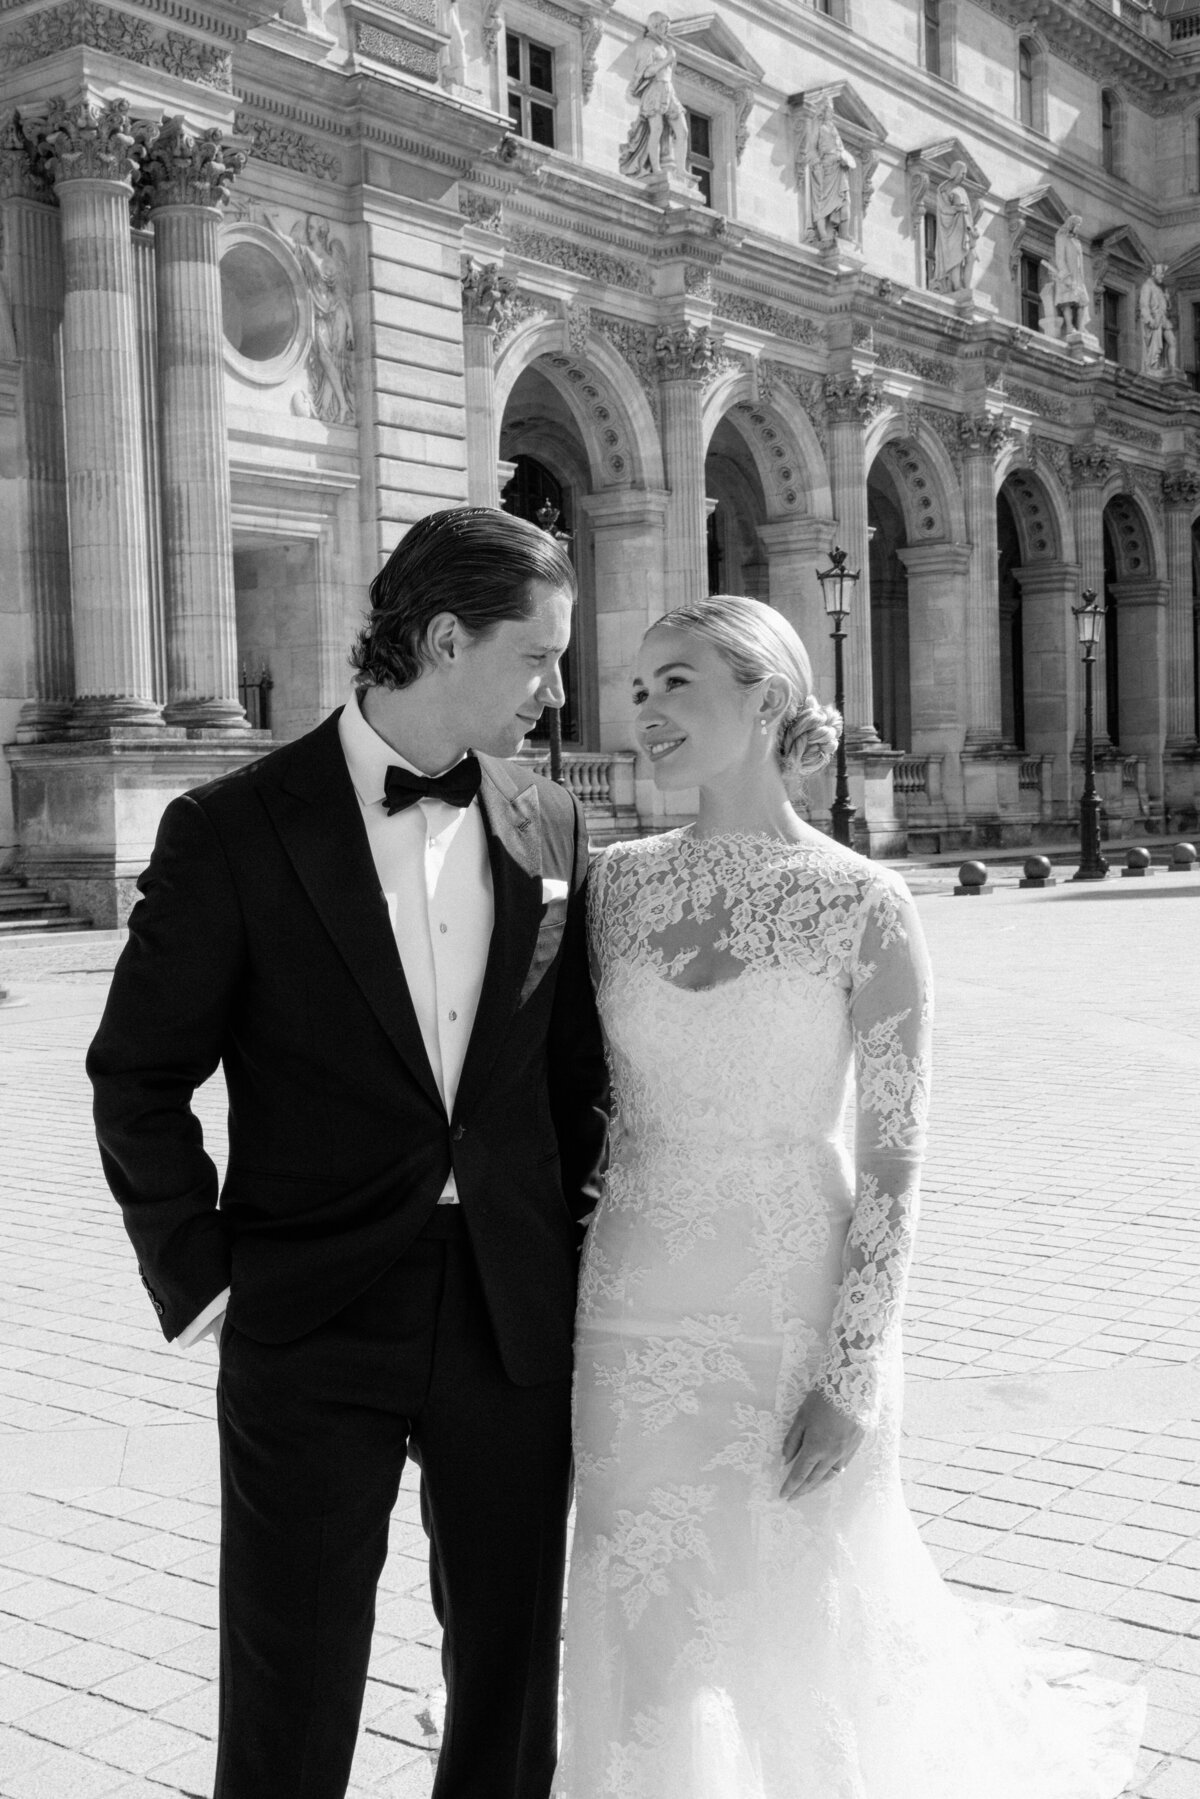 Jennifer Fox Weddings English speaking wedding planning & design agency in France crafting refined and bespoke weddings and celebrations Provence, Paris and destination wd238